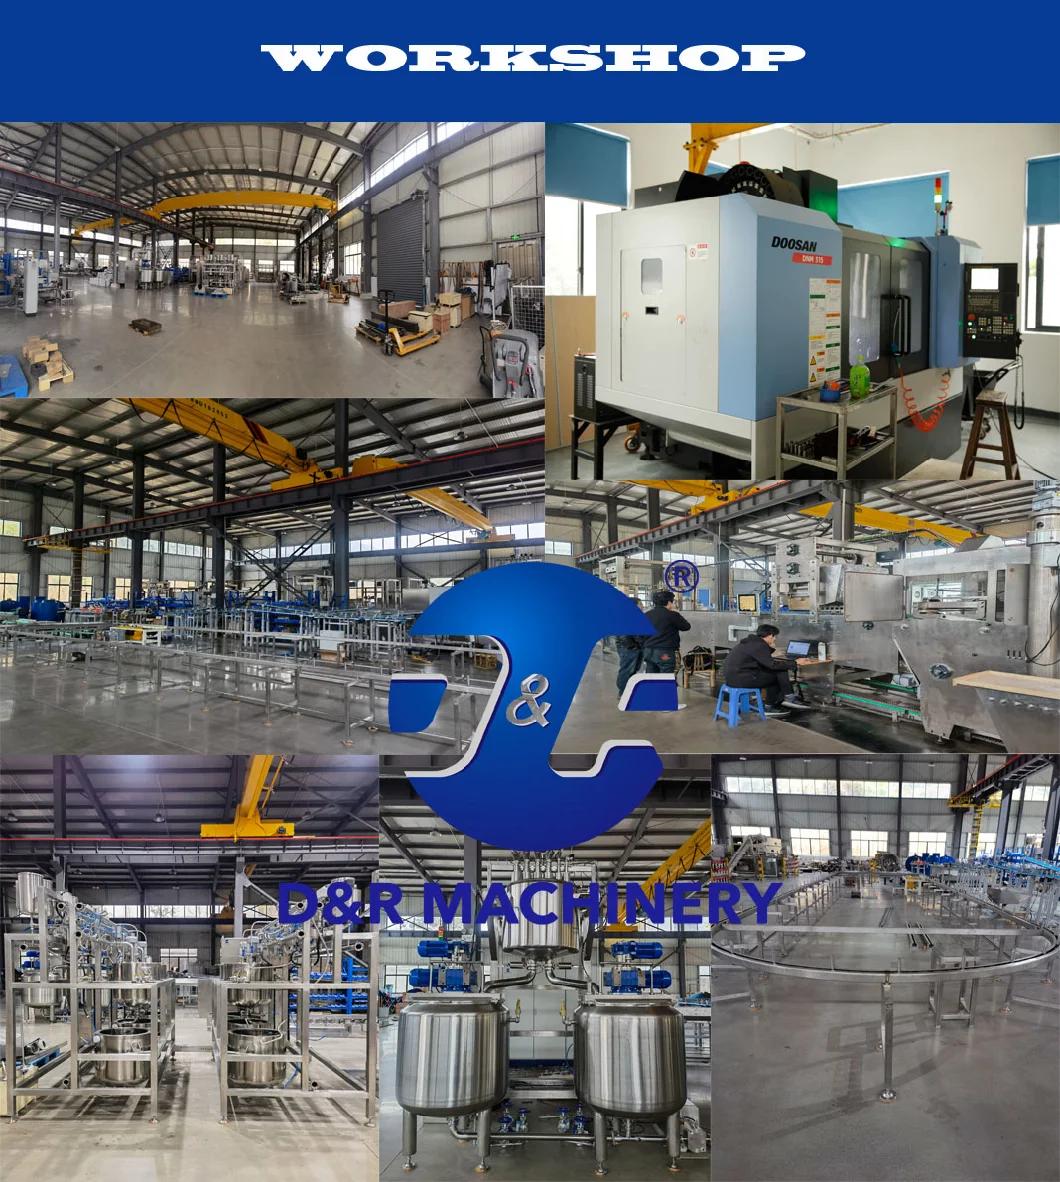 Toffee Depositing Production Line Depositing Making Machine